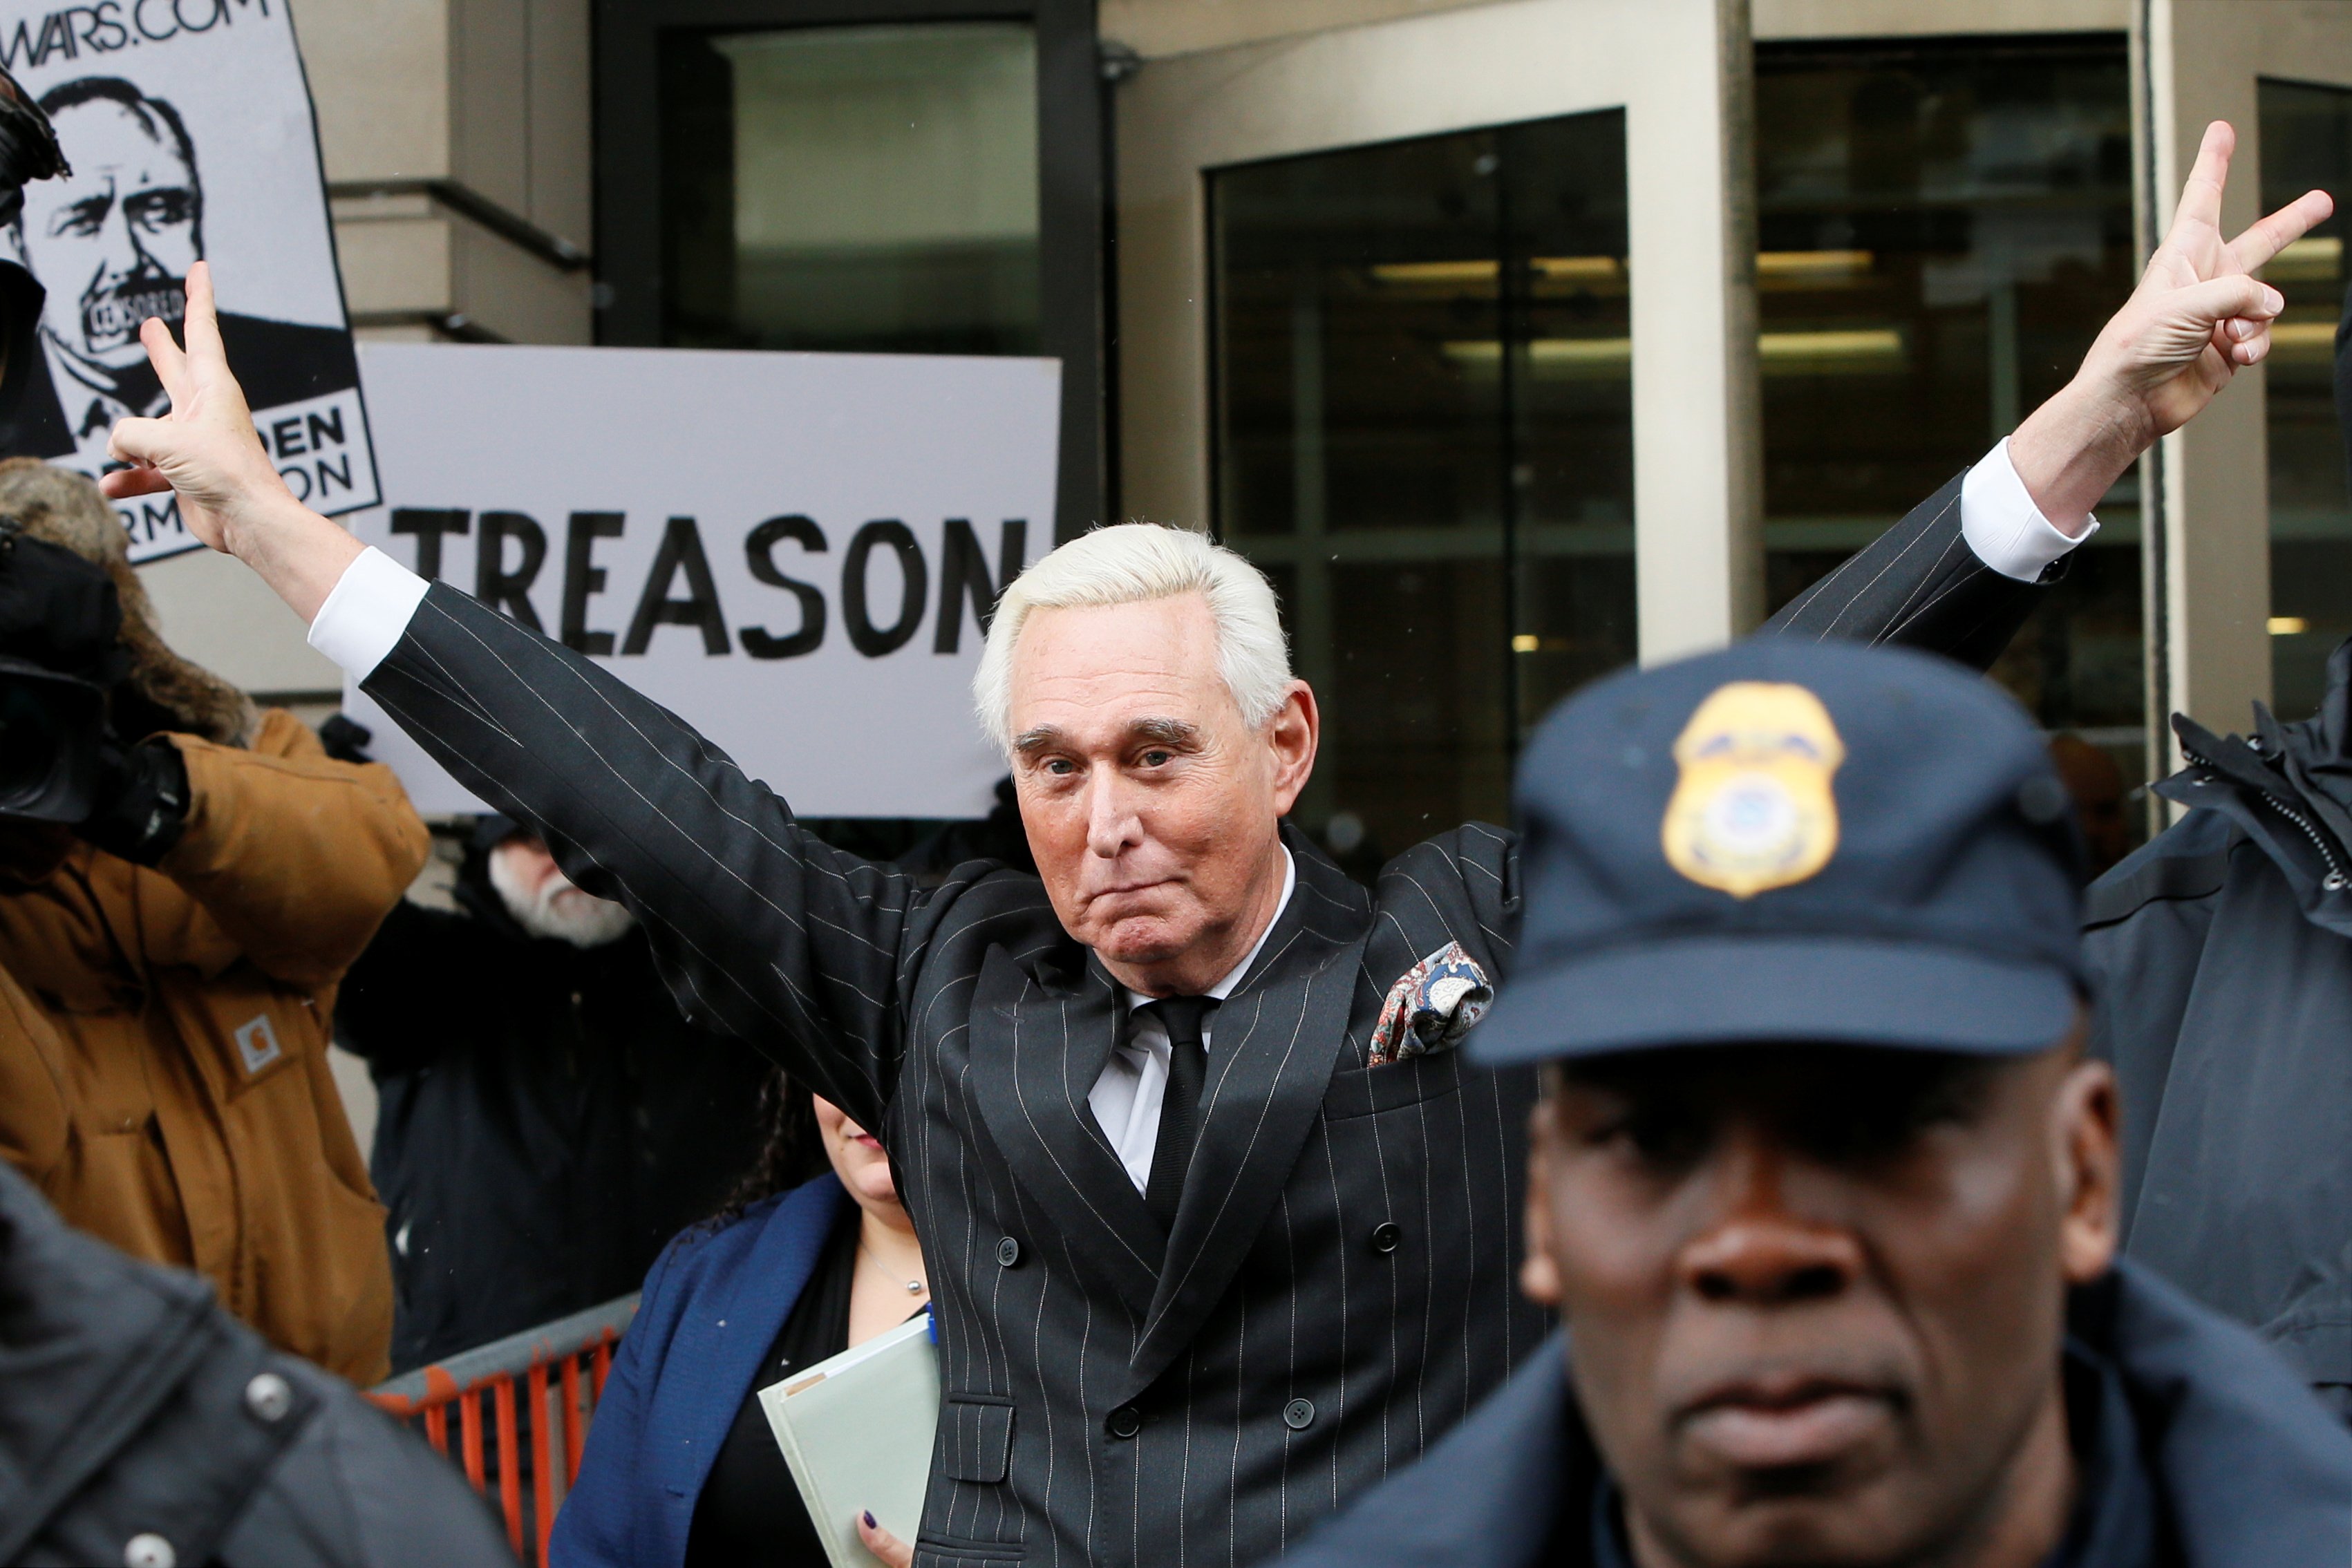 Roger Stone, longtime political ally of U.S. President Donald Trump, flashes a victory gesture as he departs following a status conference in the criminal case against him brought by Special Counsel Robert Mueller at U.S. District Court in Washington, U.S., February 1, 2019. REUTERS/Jim Bourg